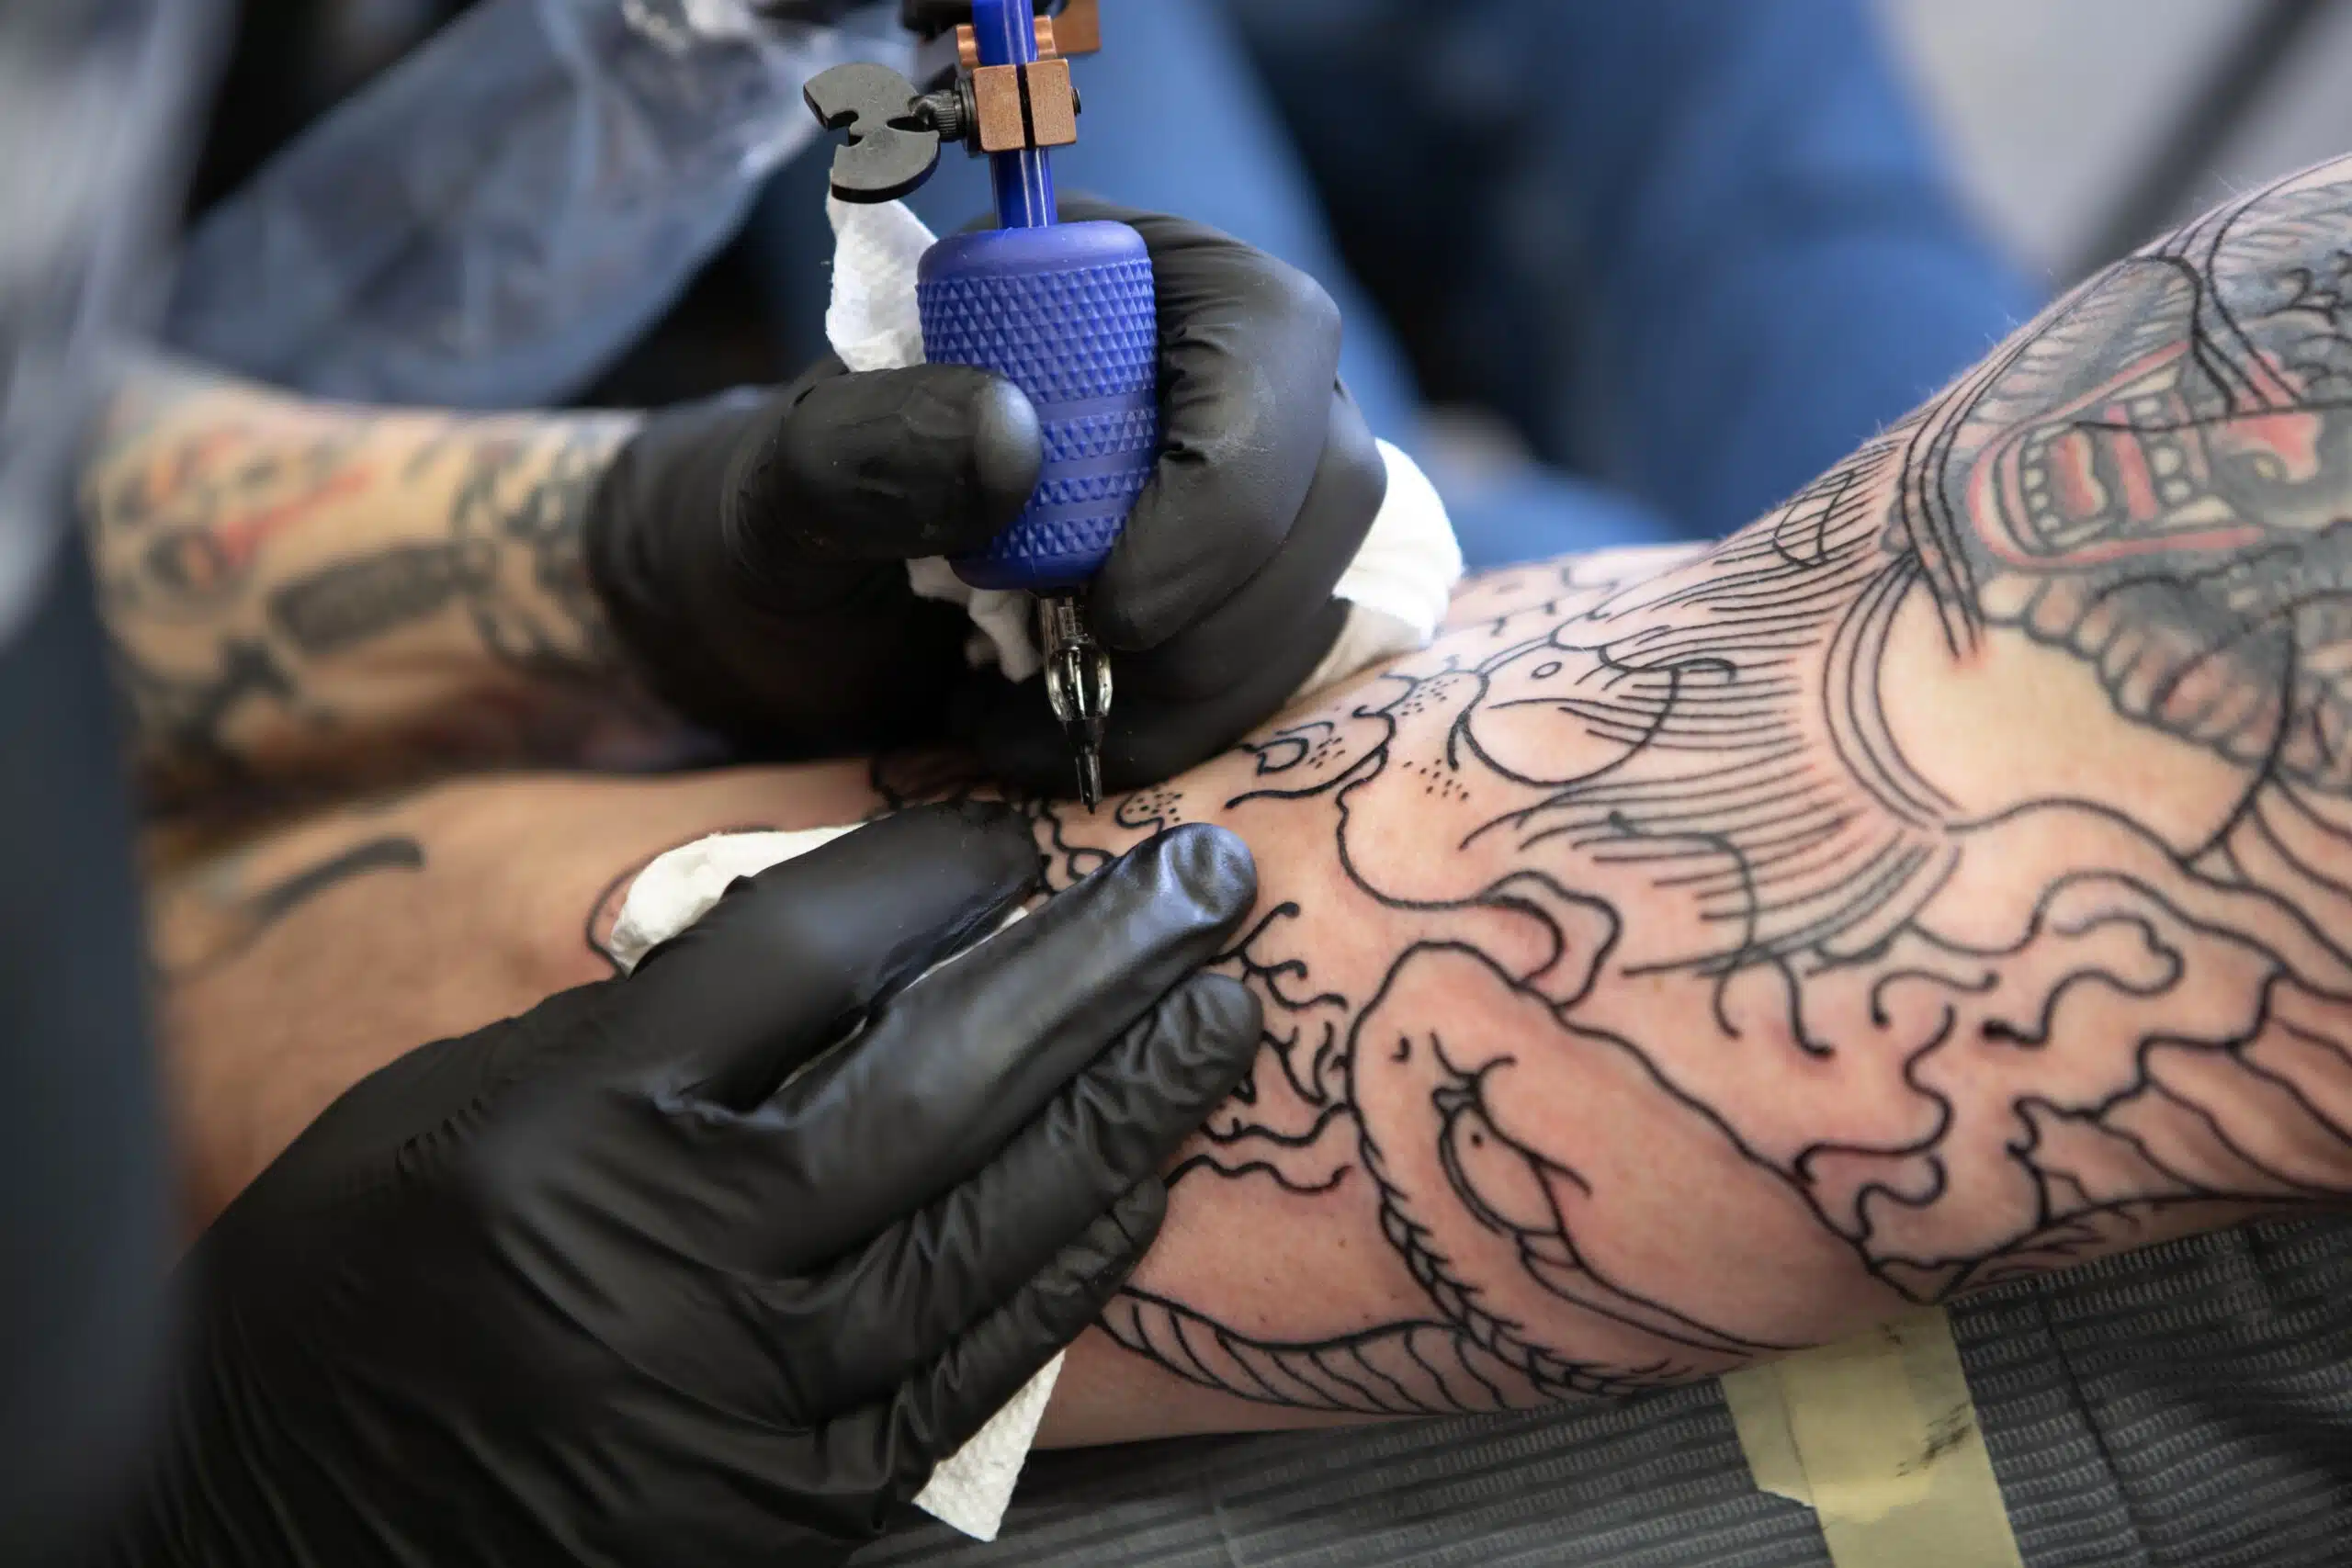 Tattoos That Help You Know What Not to Get for Your Next Ink